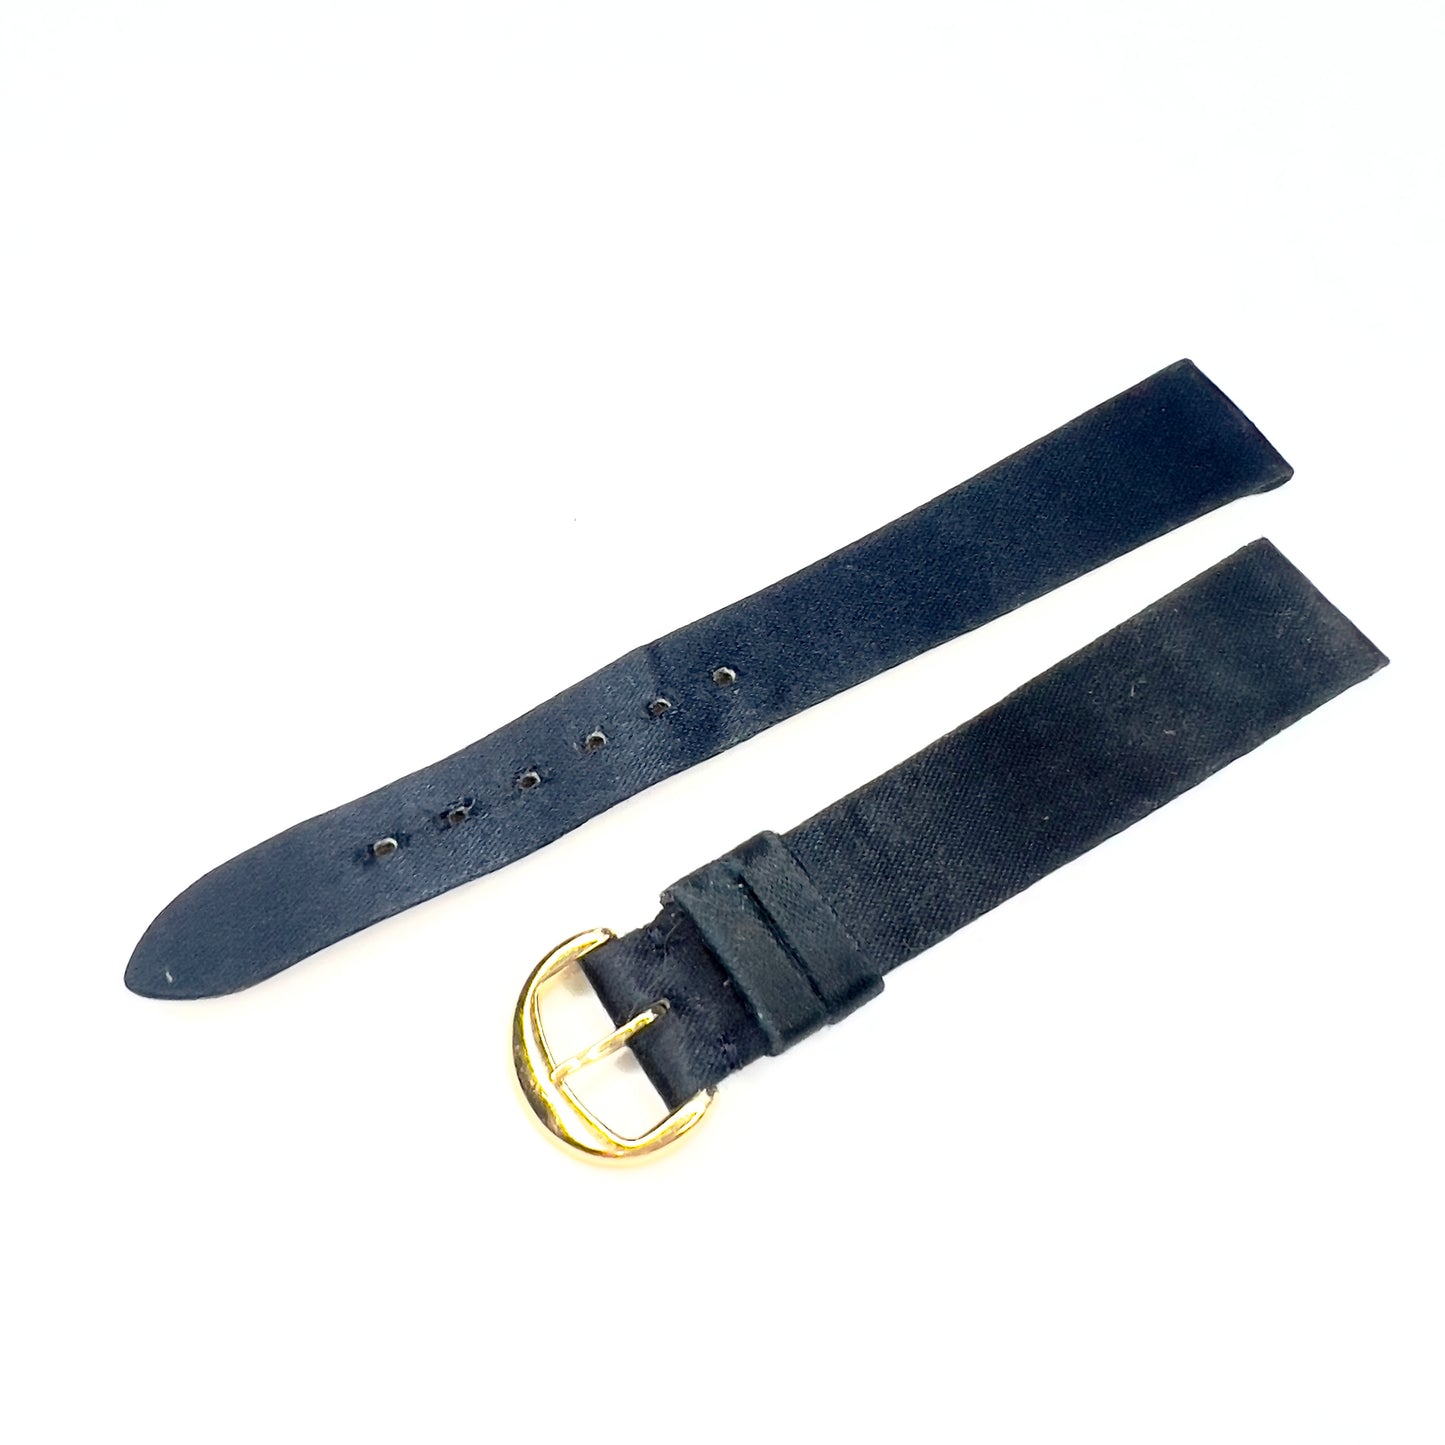 CHAUMET Navy Blue Satin/Leather Band Strap with Gold Plated Chaumet BUCKLE